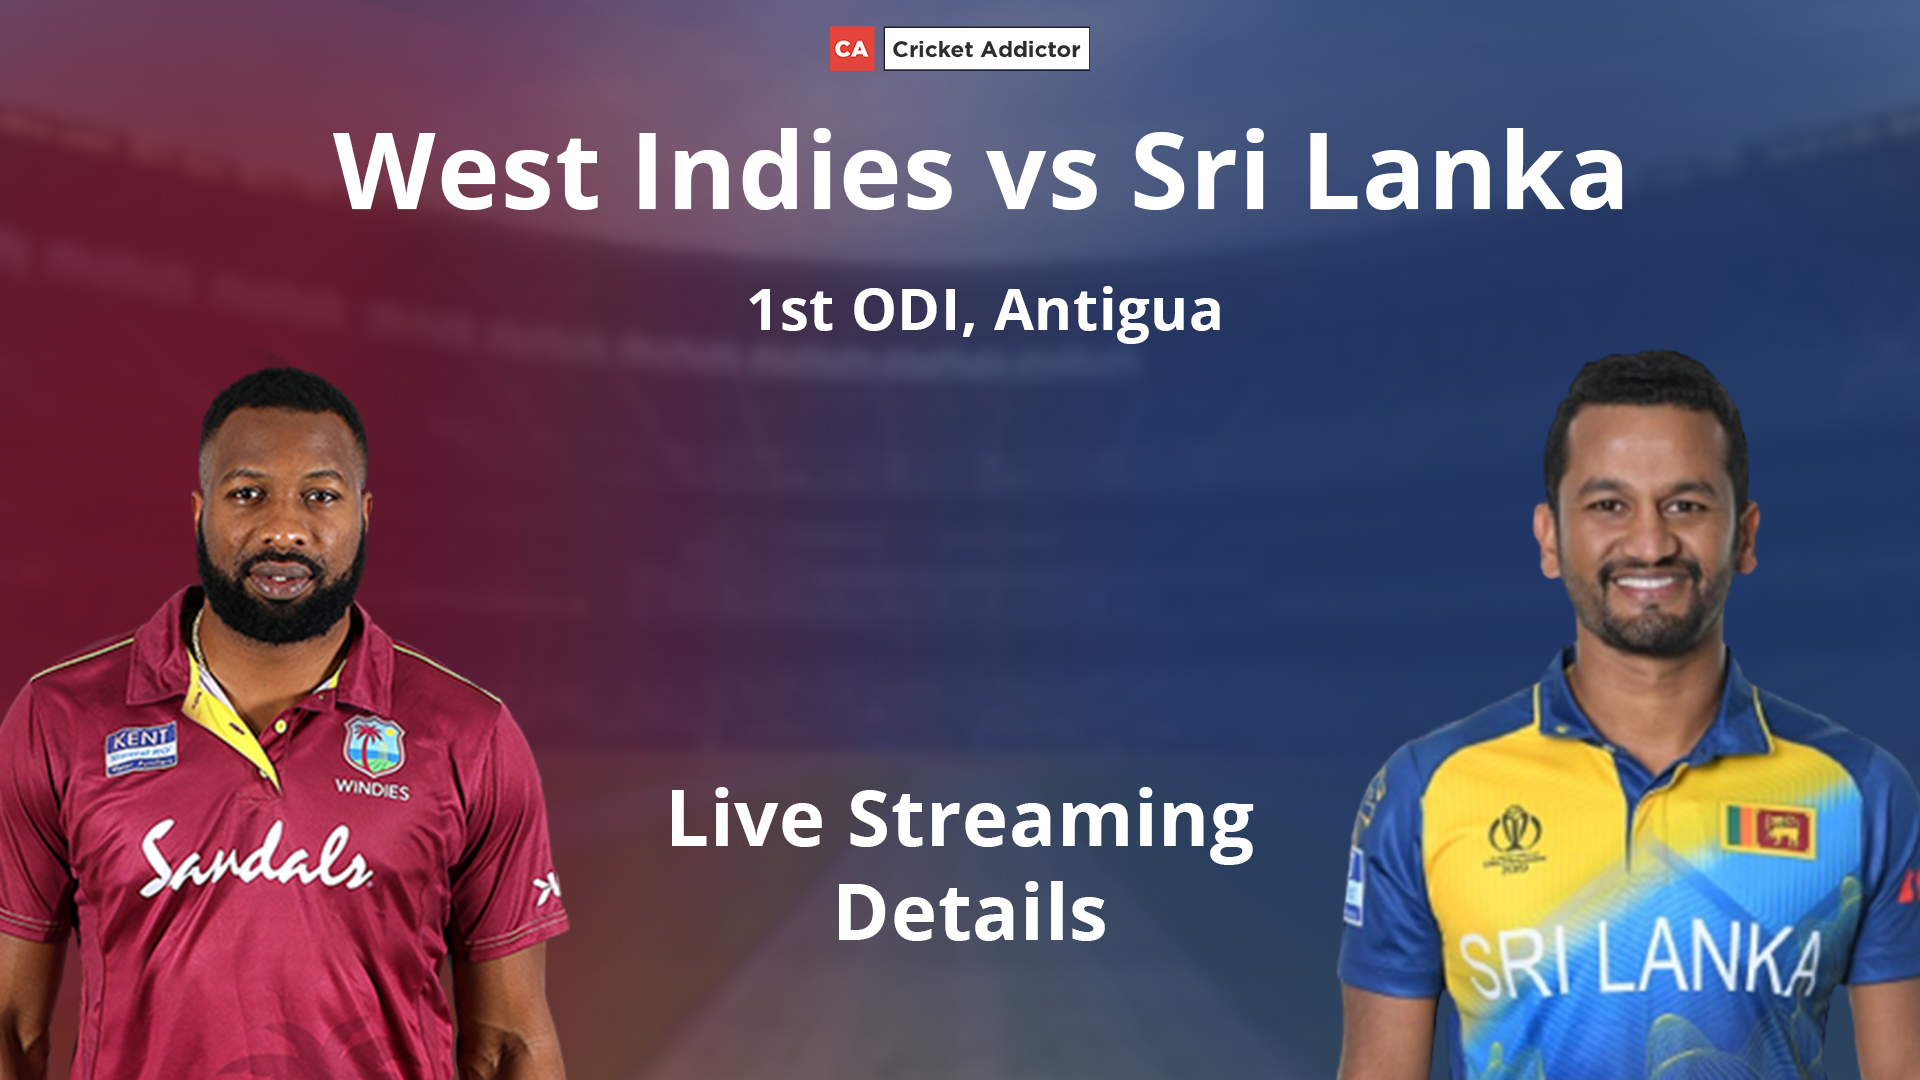 West Indies vs Sri Lanka 2021, 1st ODI: When And Where To Watch, Live Streaming Details